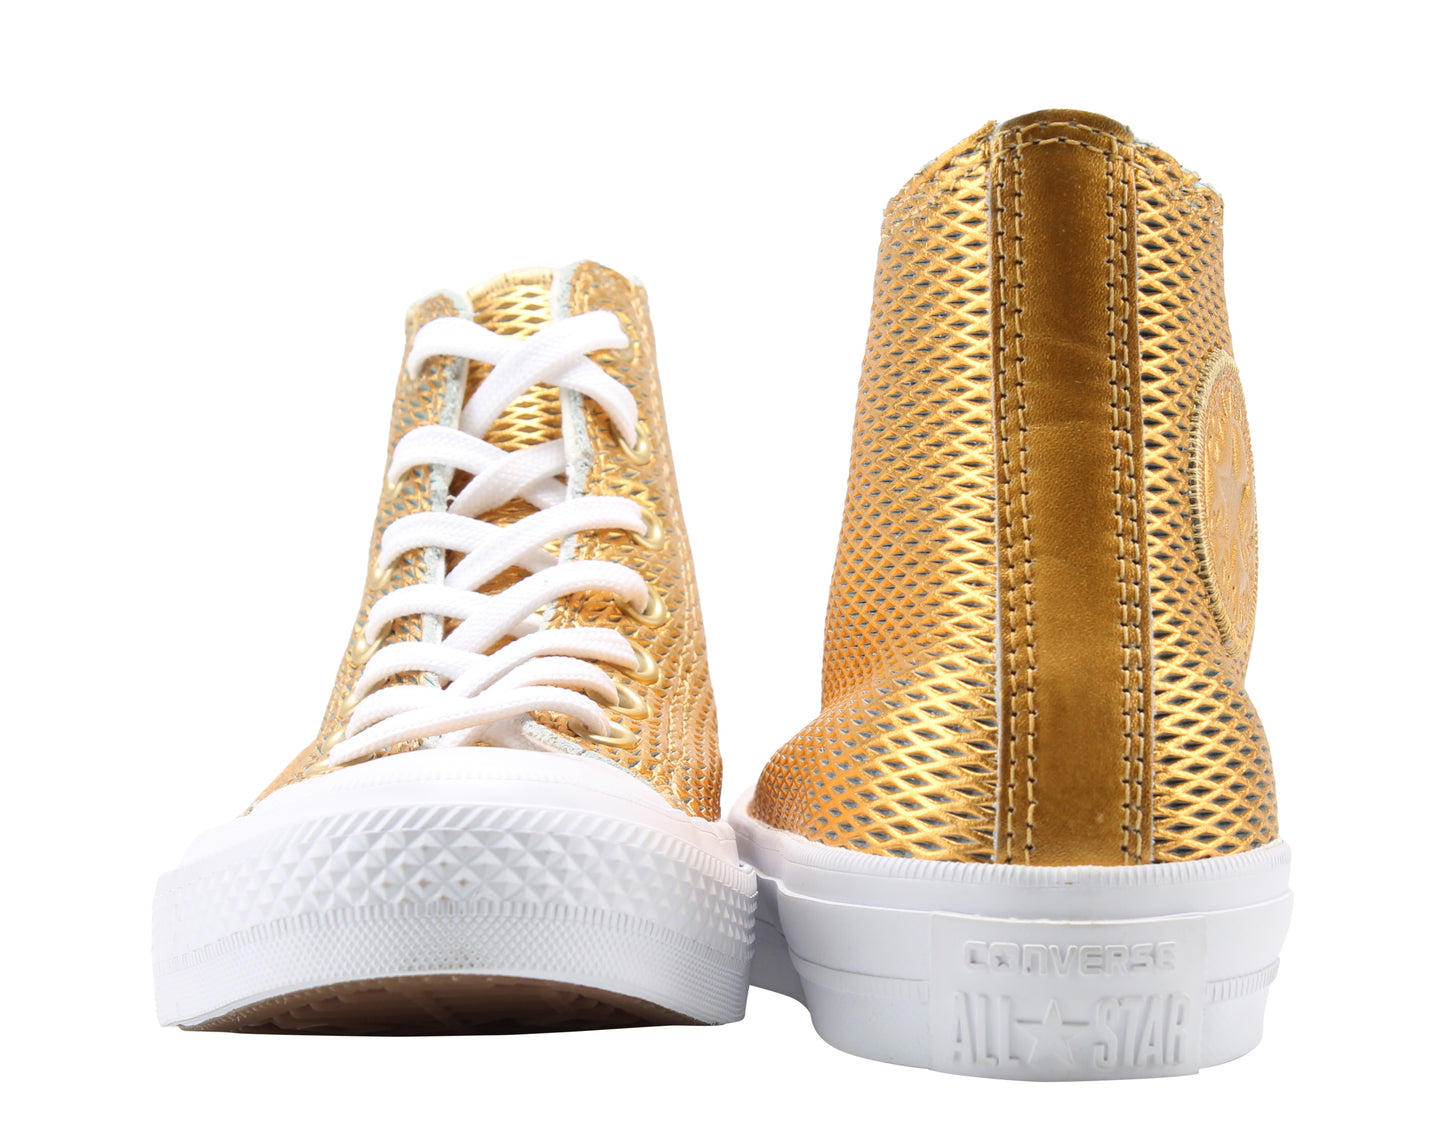 Converse Chuck Taylor All Star II Hi Gold/White Women's Sneakers 555796C